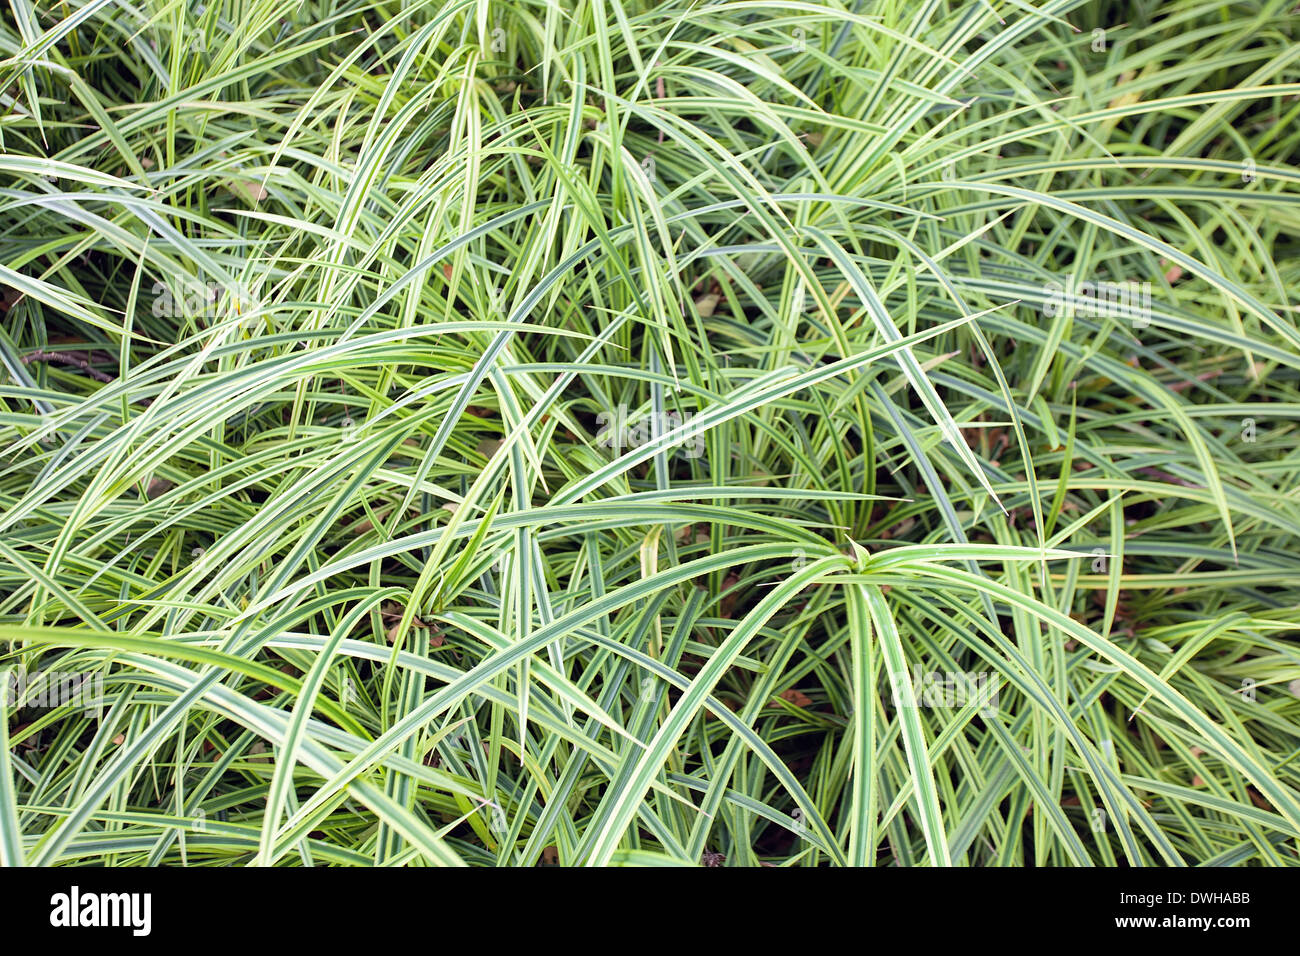 Variegated Monkey Grass Groundcover Background Stock Photo